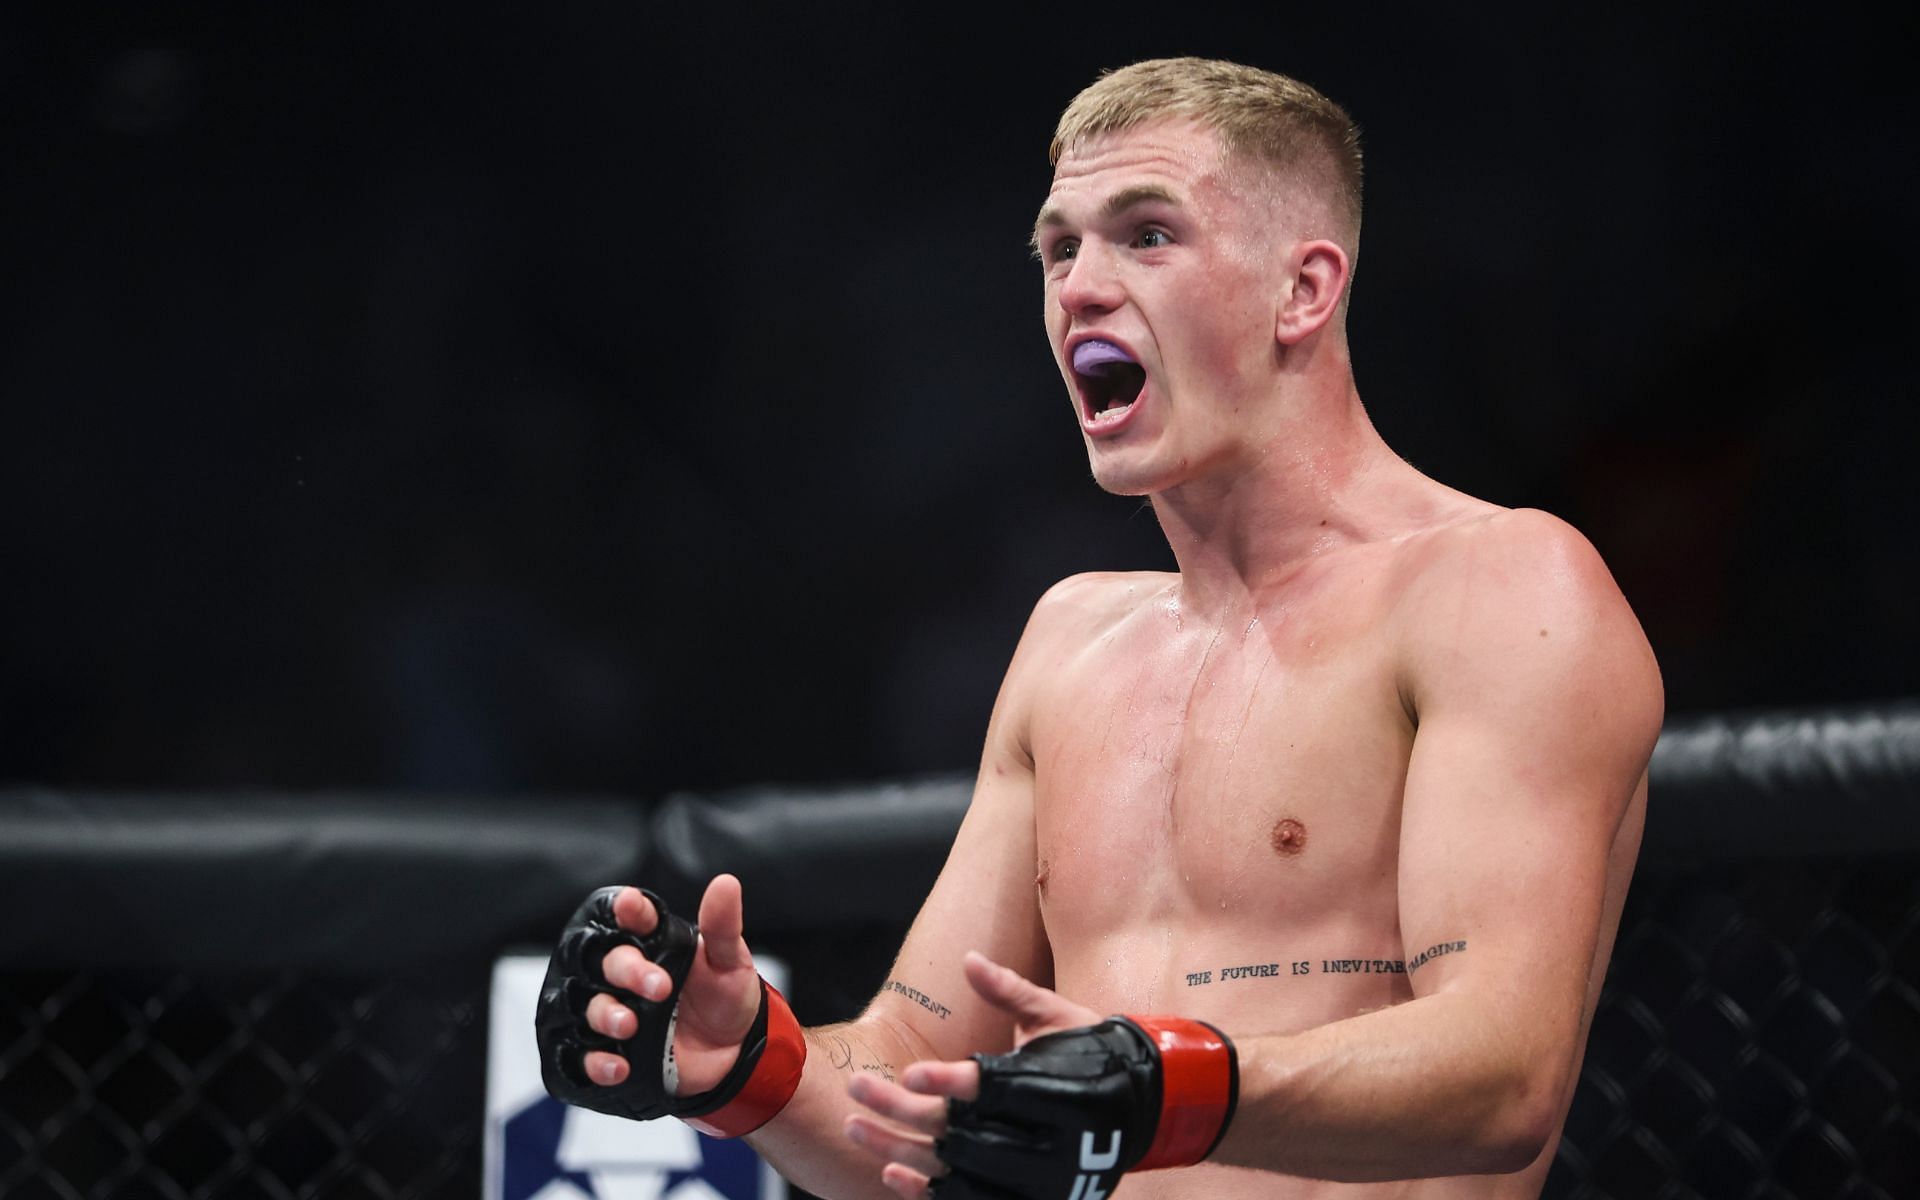 UFC welterweight contender Ian Garry has garnered a reputation for his outspokenness and confidence [Image courtesy: Getty Images]